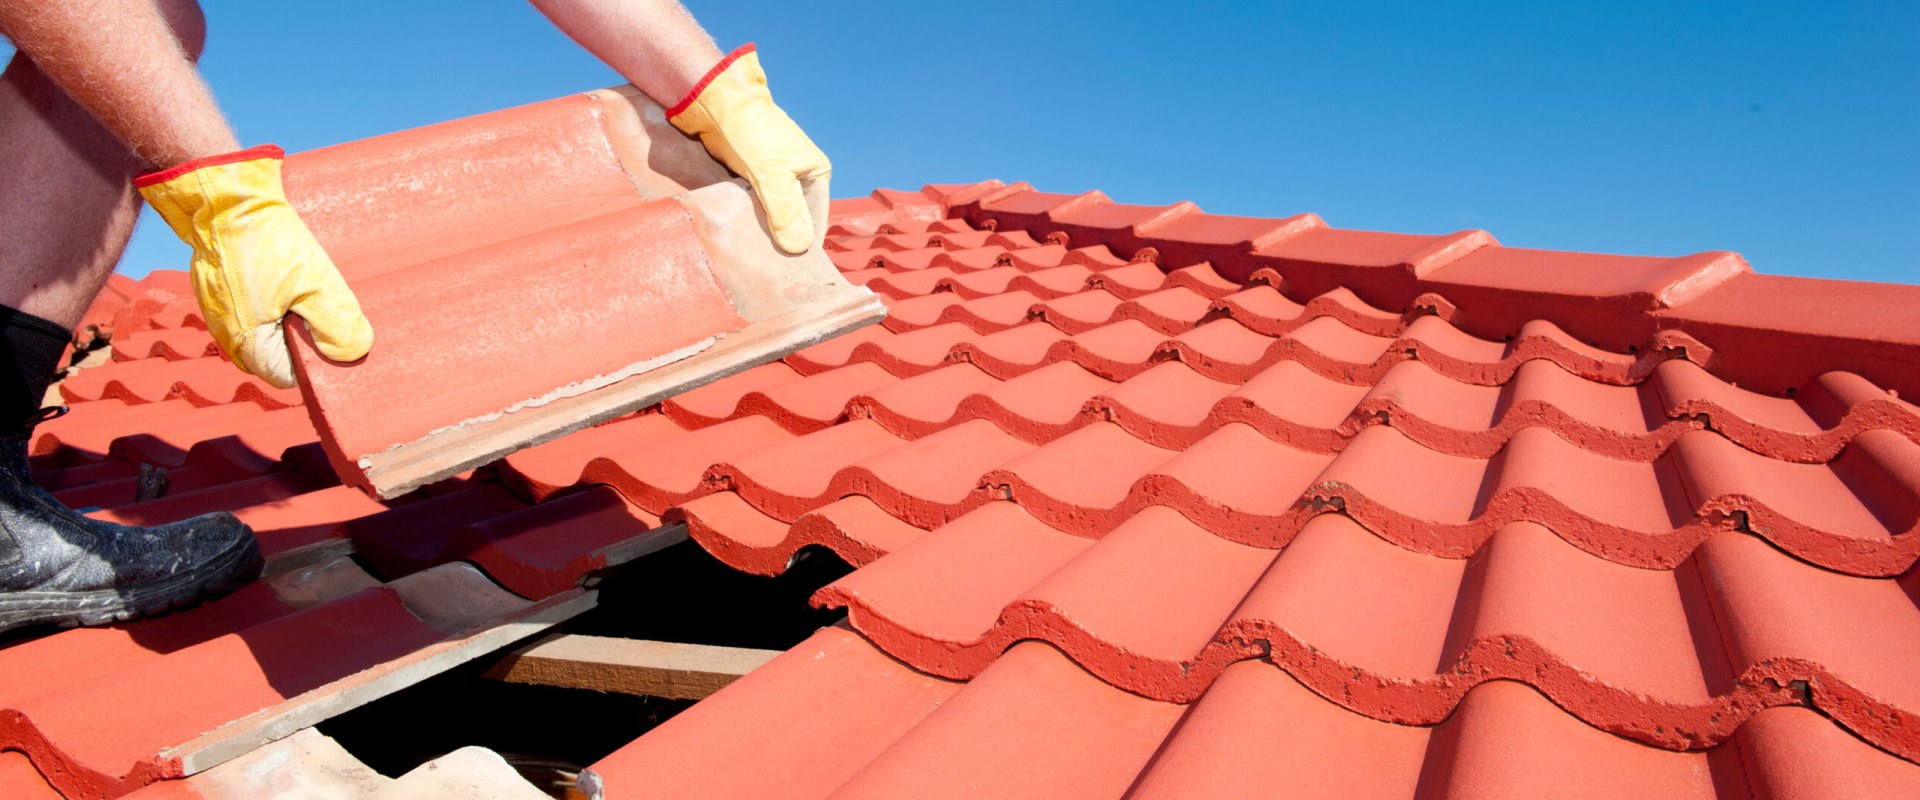 Finding the Best Roofers in Suffolk County, NY